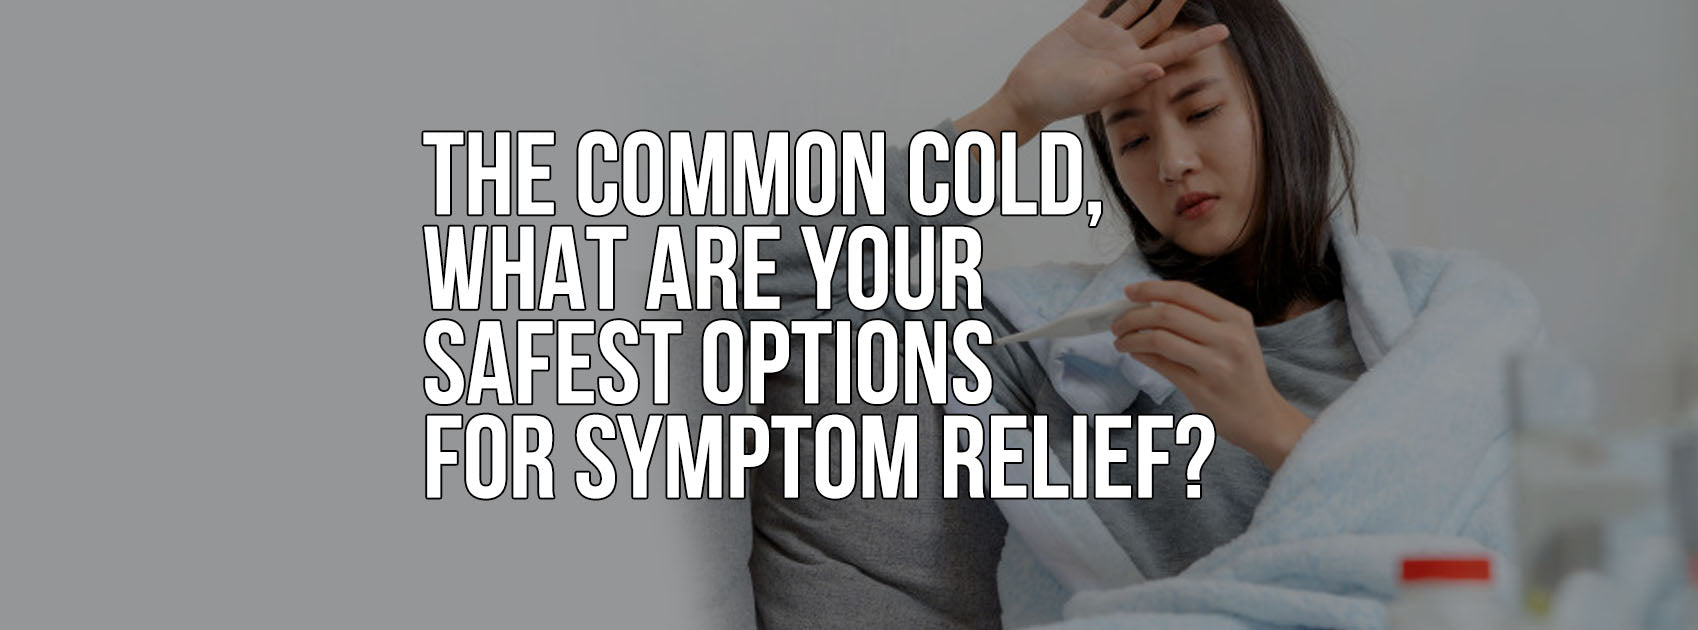 THE COMMON COLD, WHAT ARE YOUR SAFEST OPTIONS FOR SYMPTOM RELIEF?